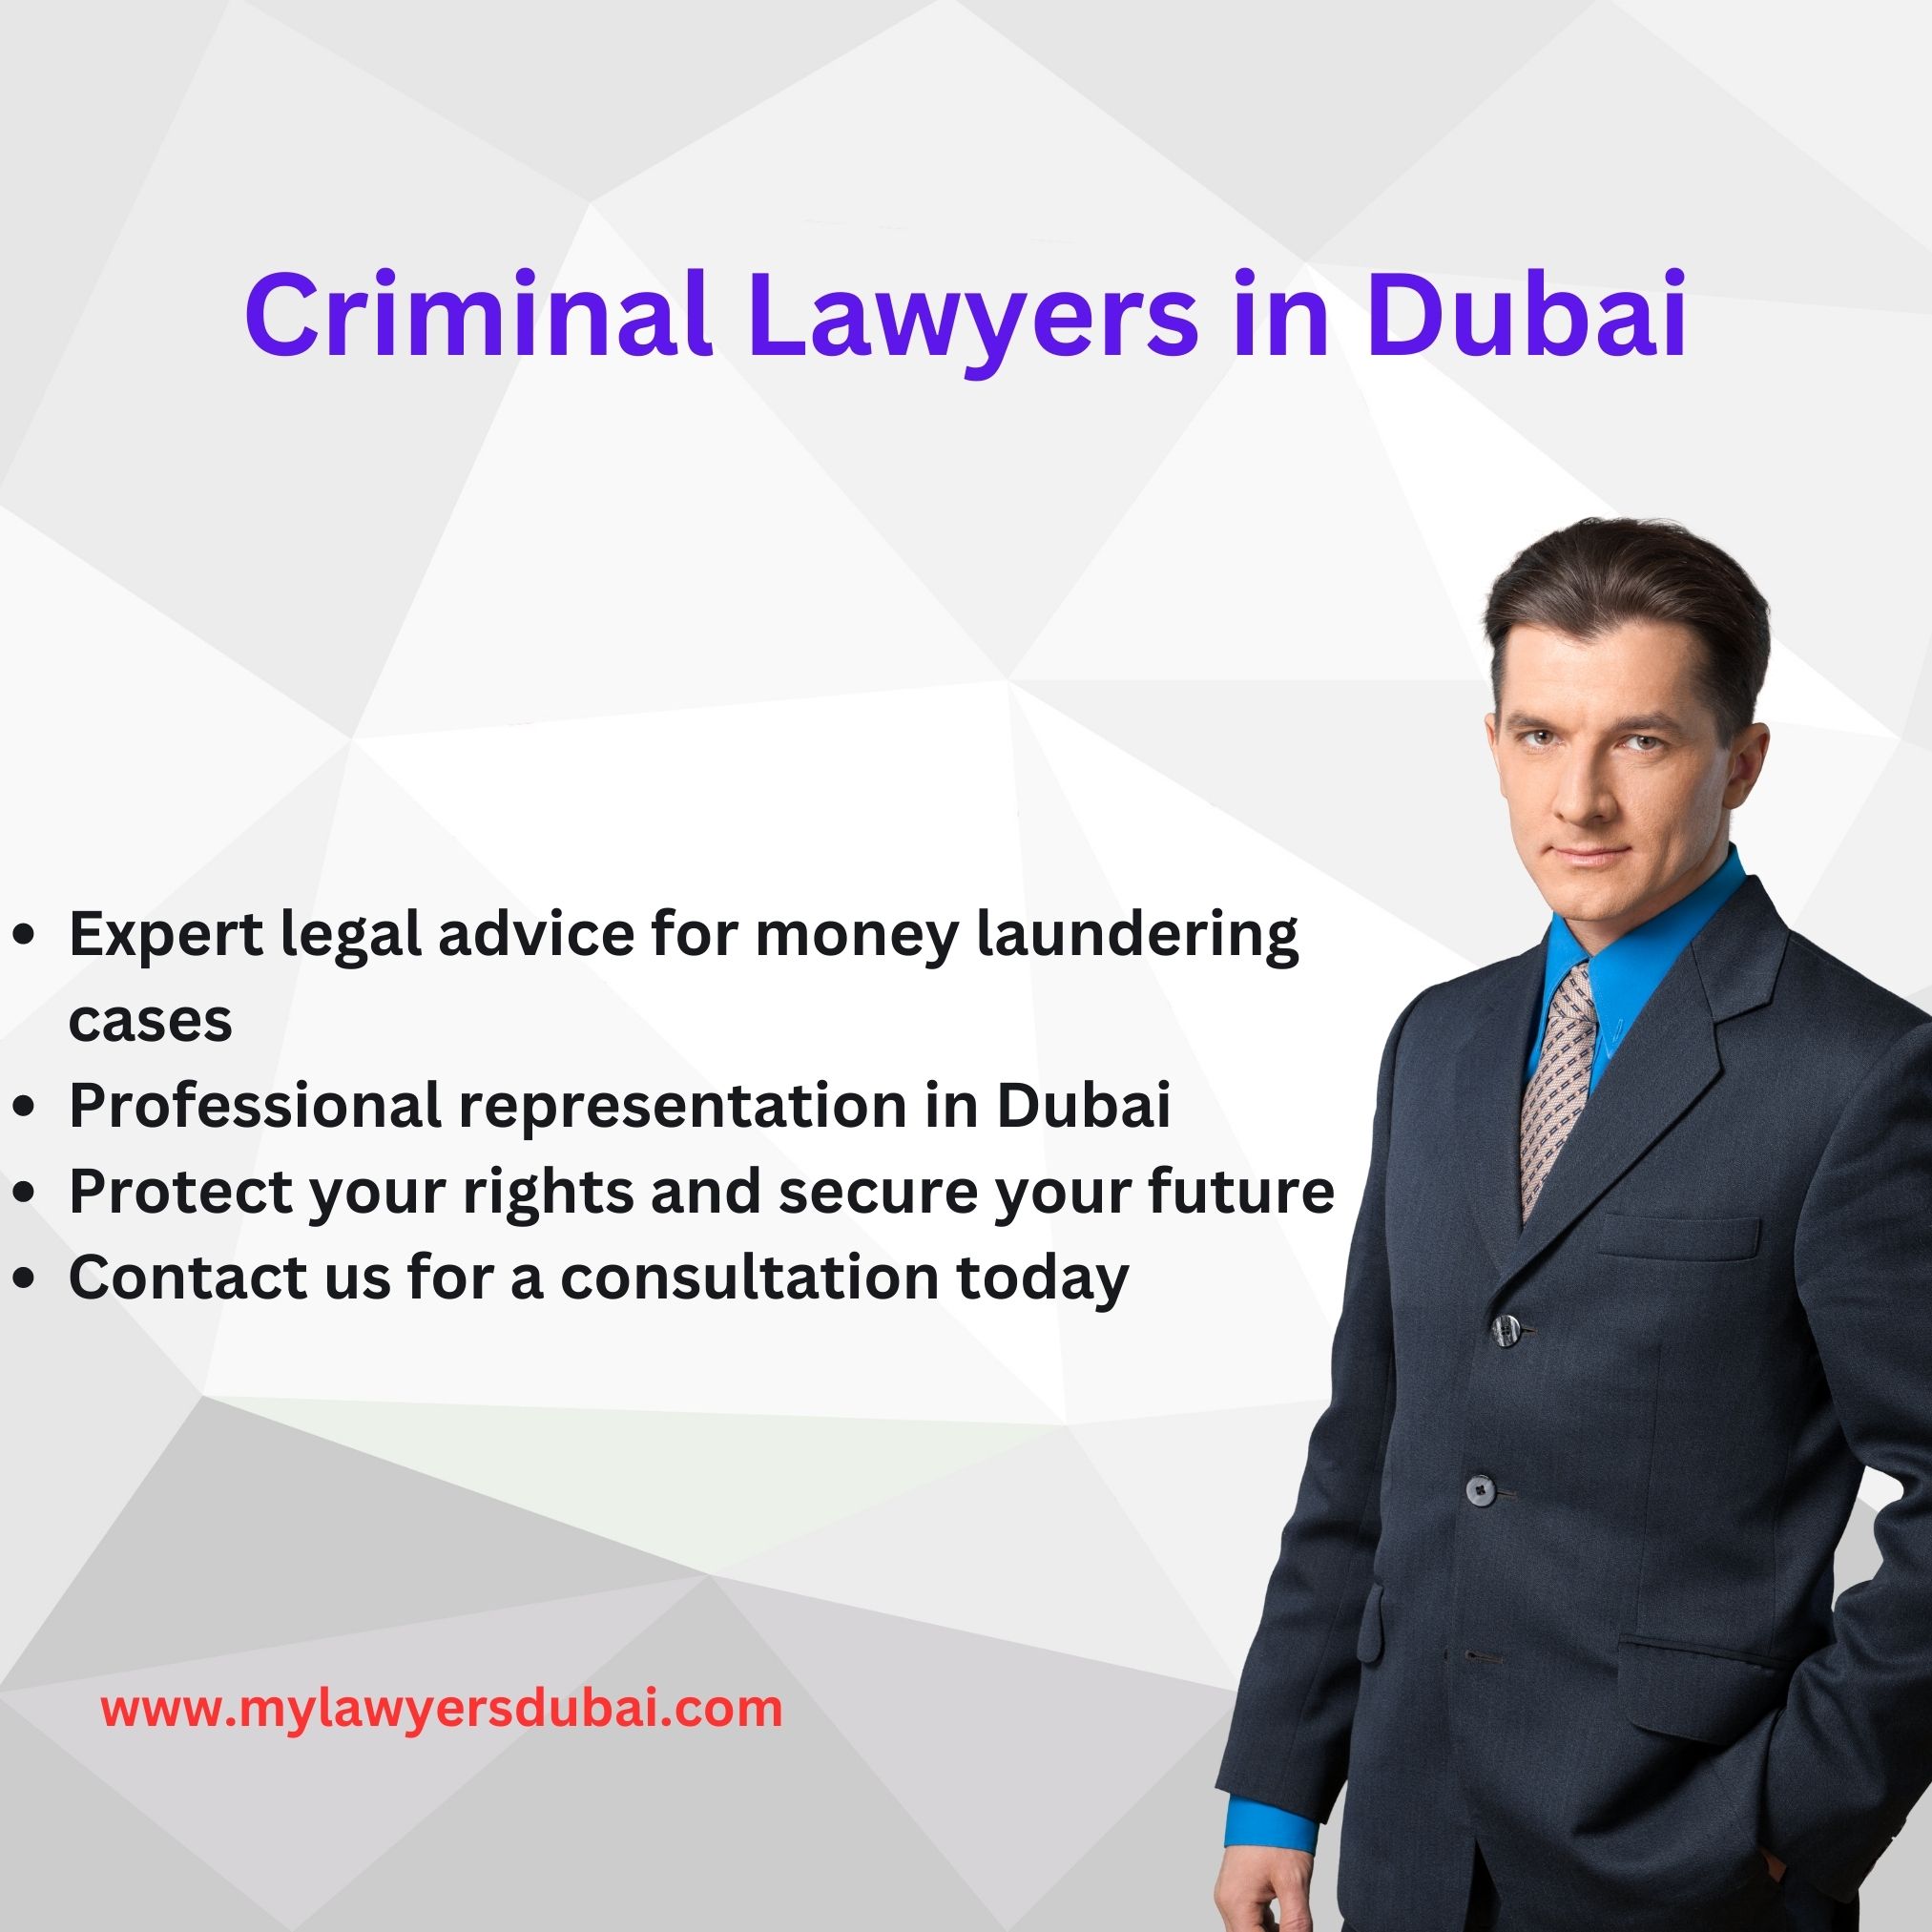 Criminal lawyers for money laundering in Dubai